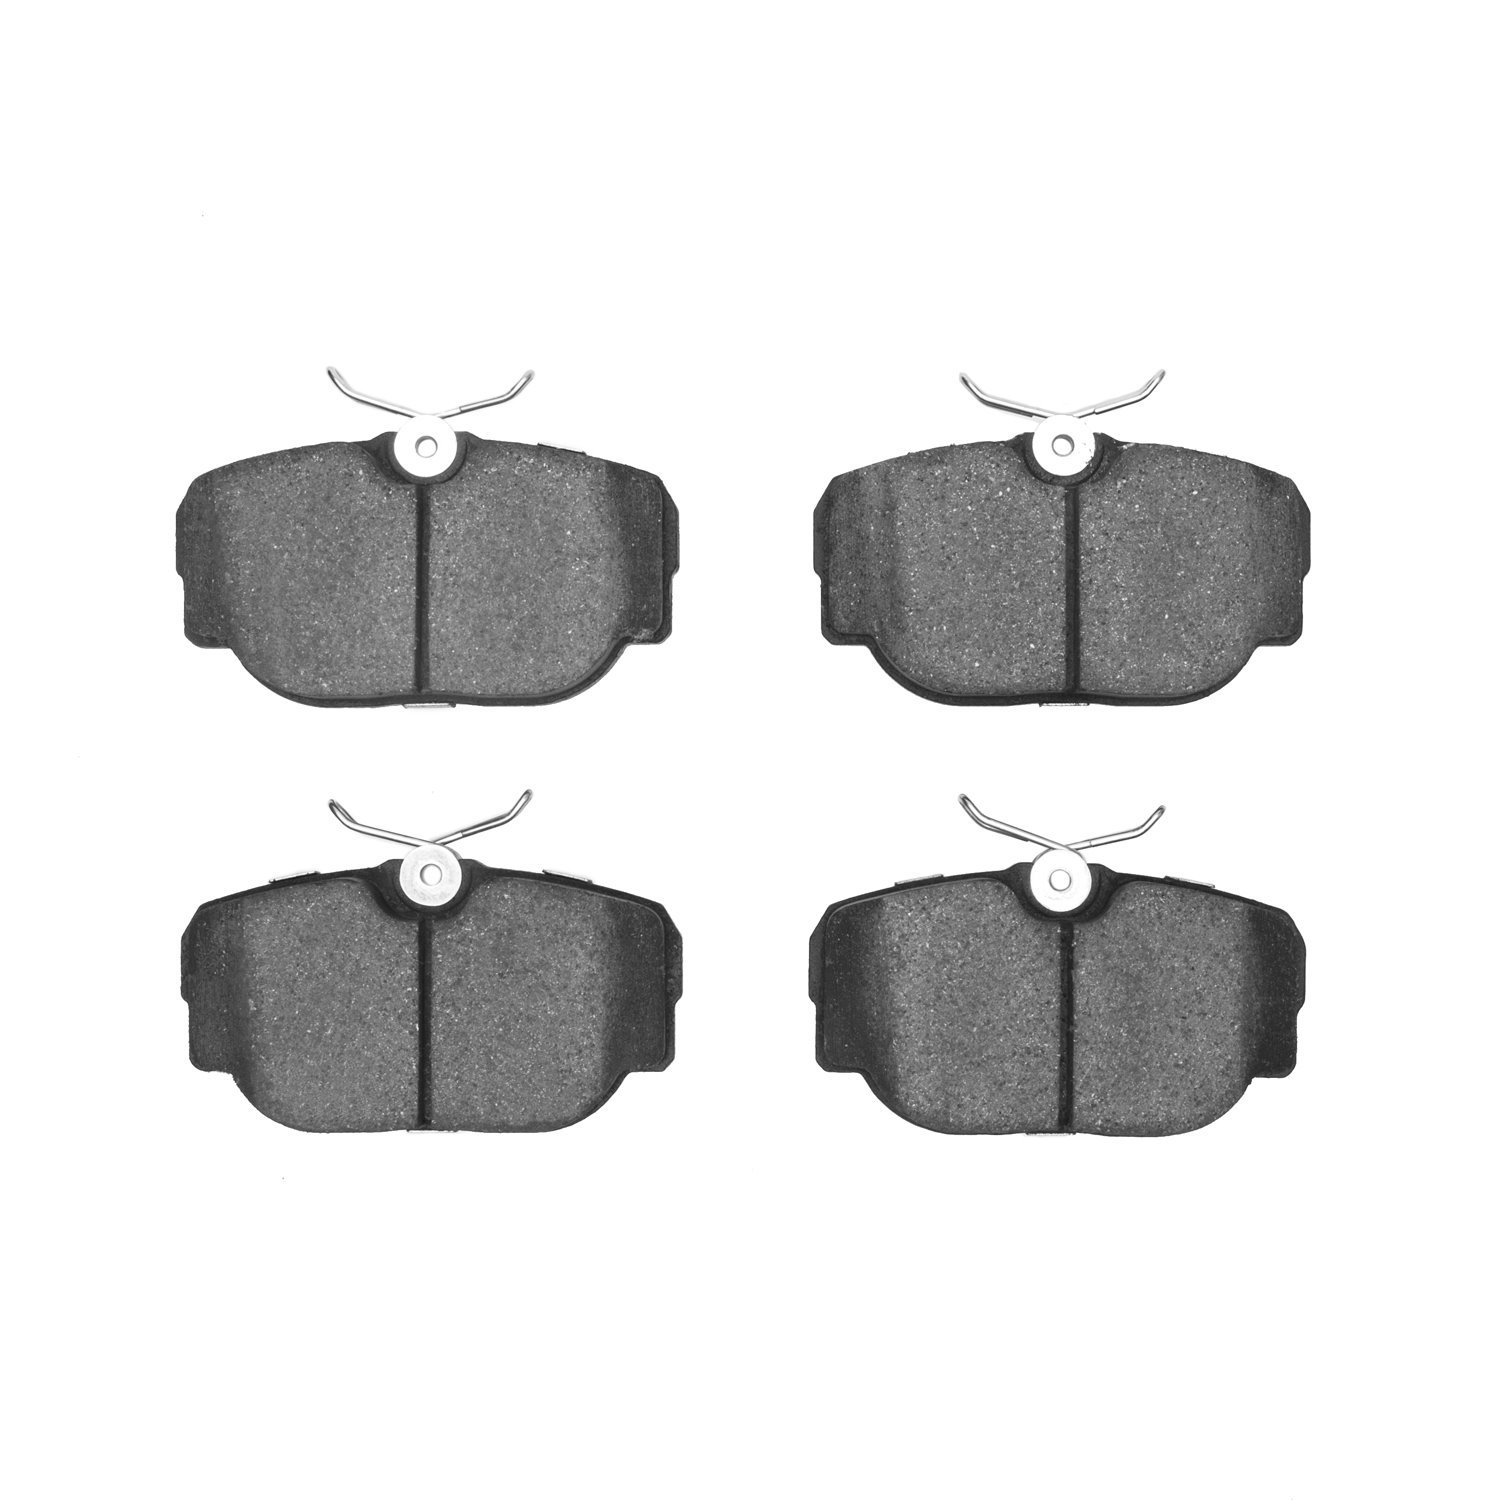 1552-0493-00 5000 Advanced Low-Metallic Brake Pads, 1983-2004 Multiple Makes/Models, Position: Front,Rear